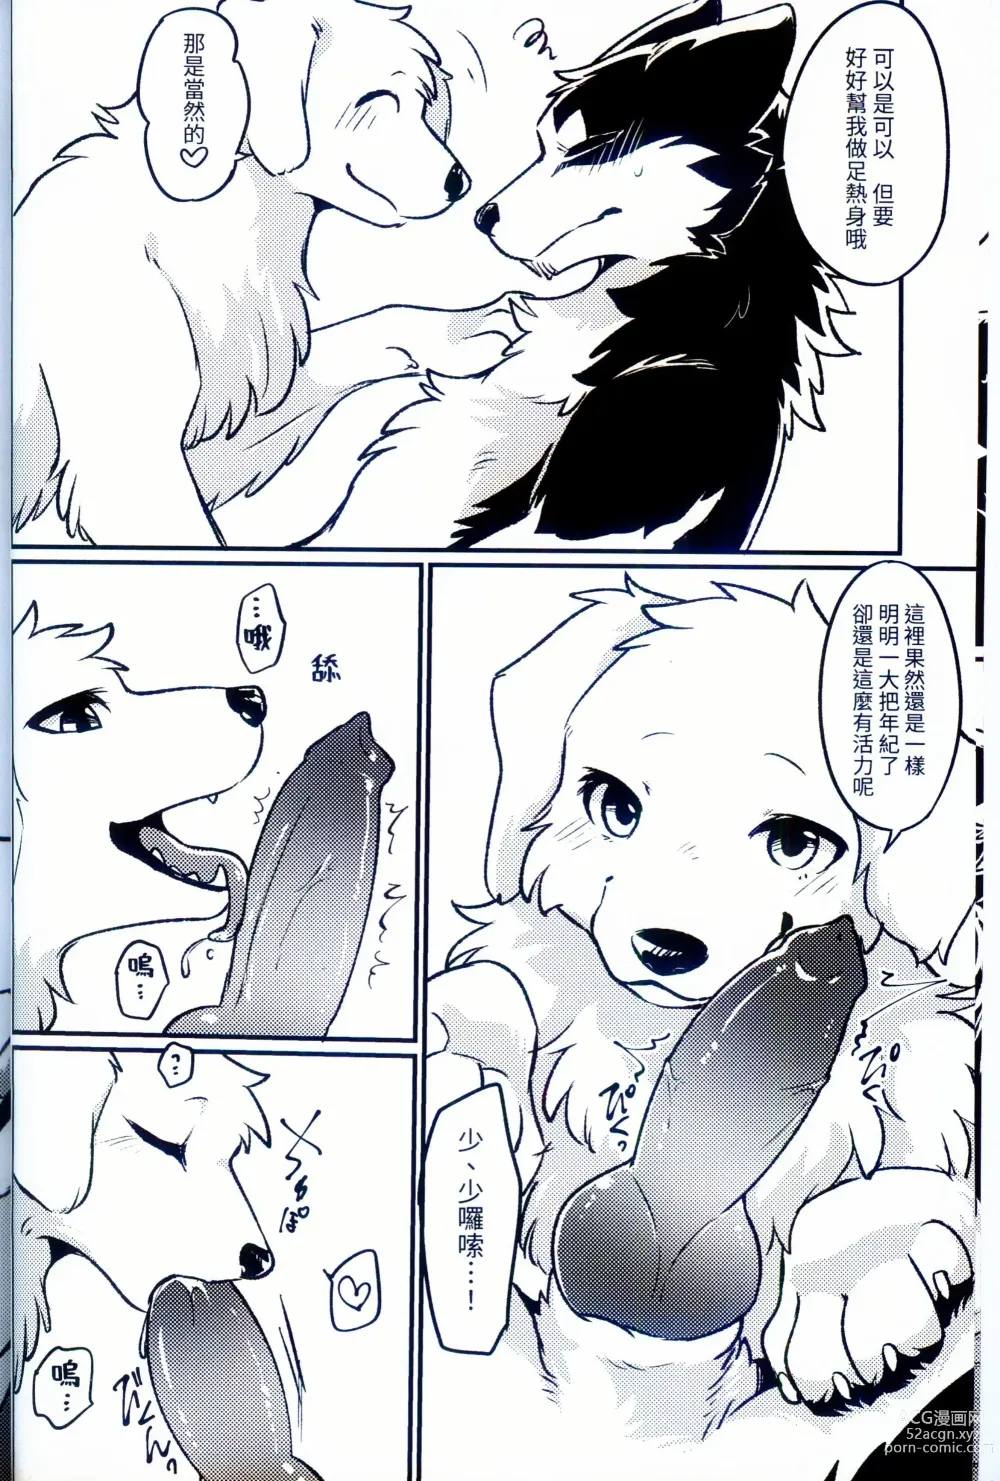 Page 5 of doujinshi More,more,MORE! (decensored)